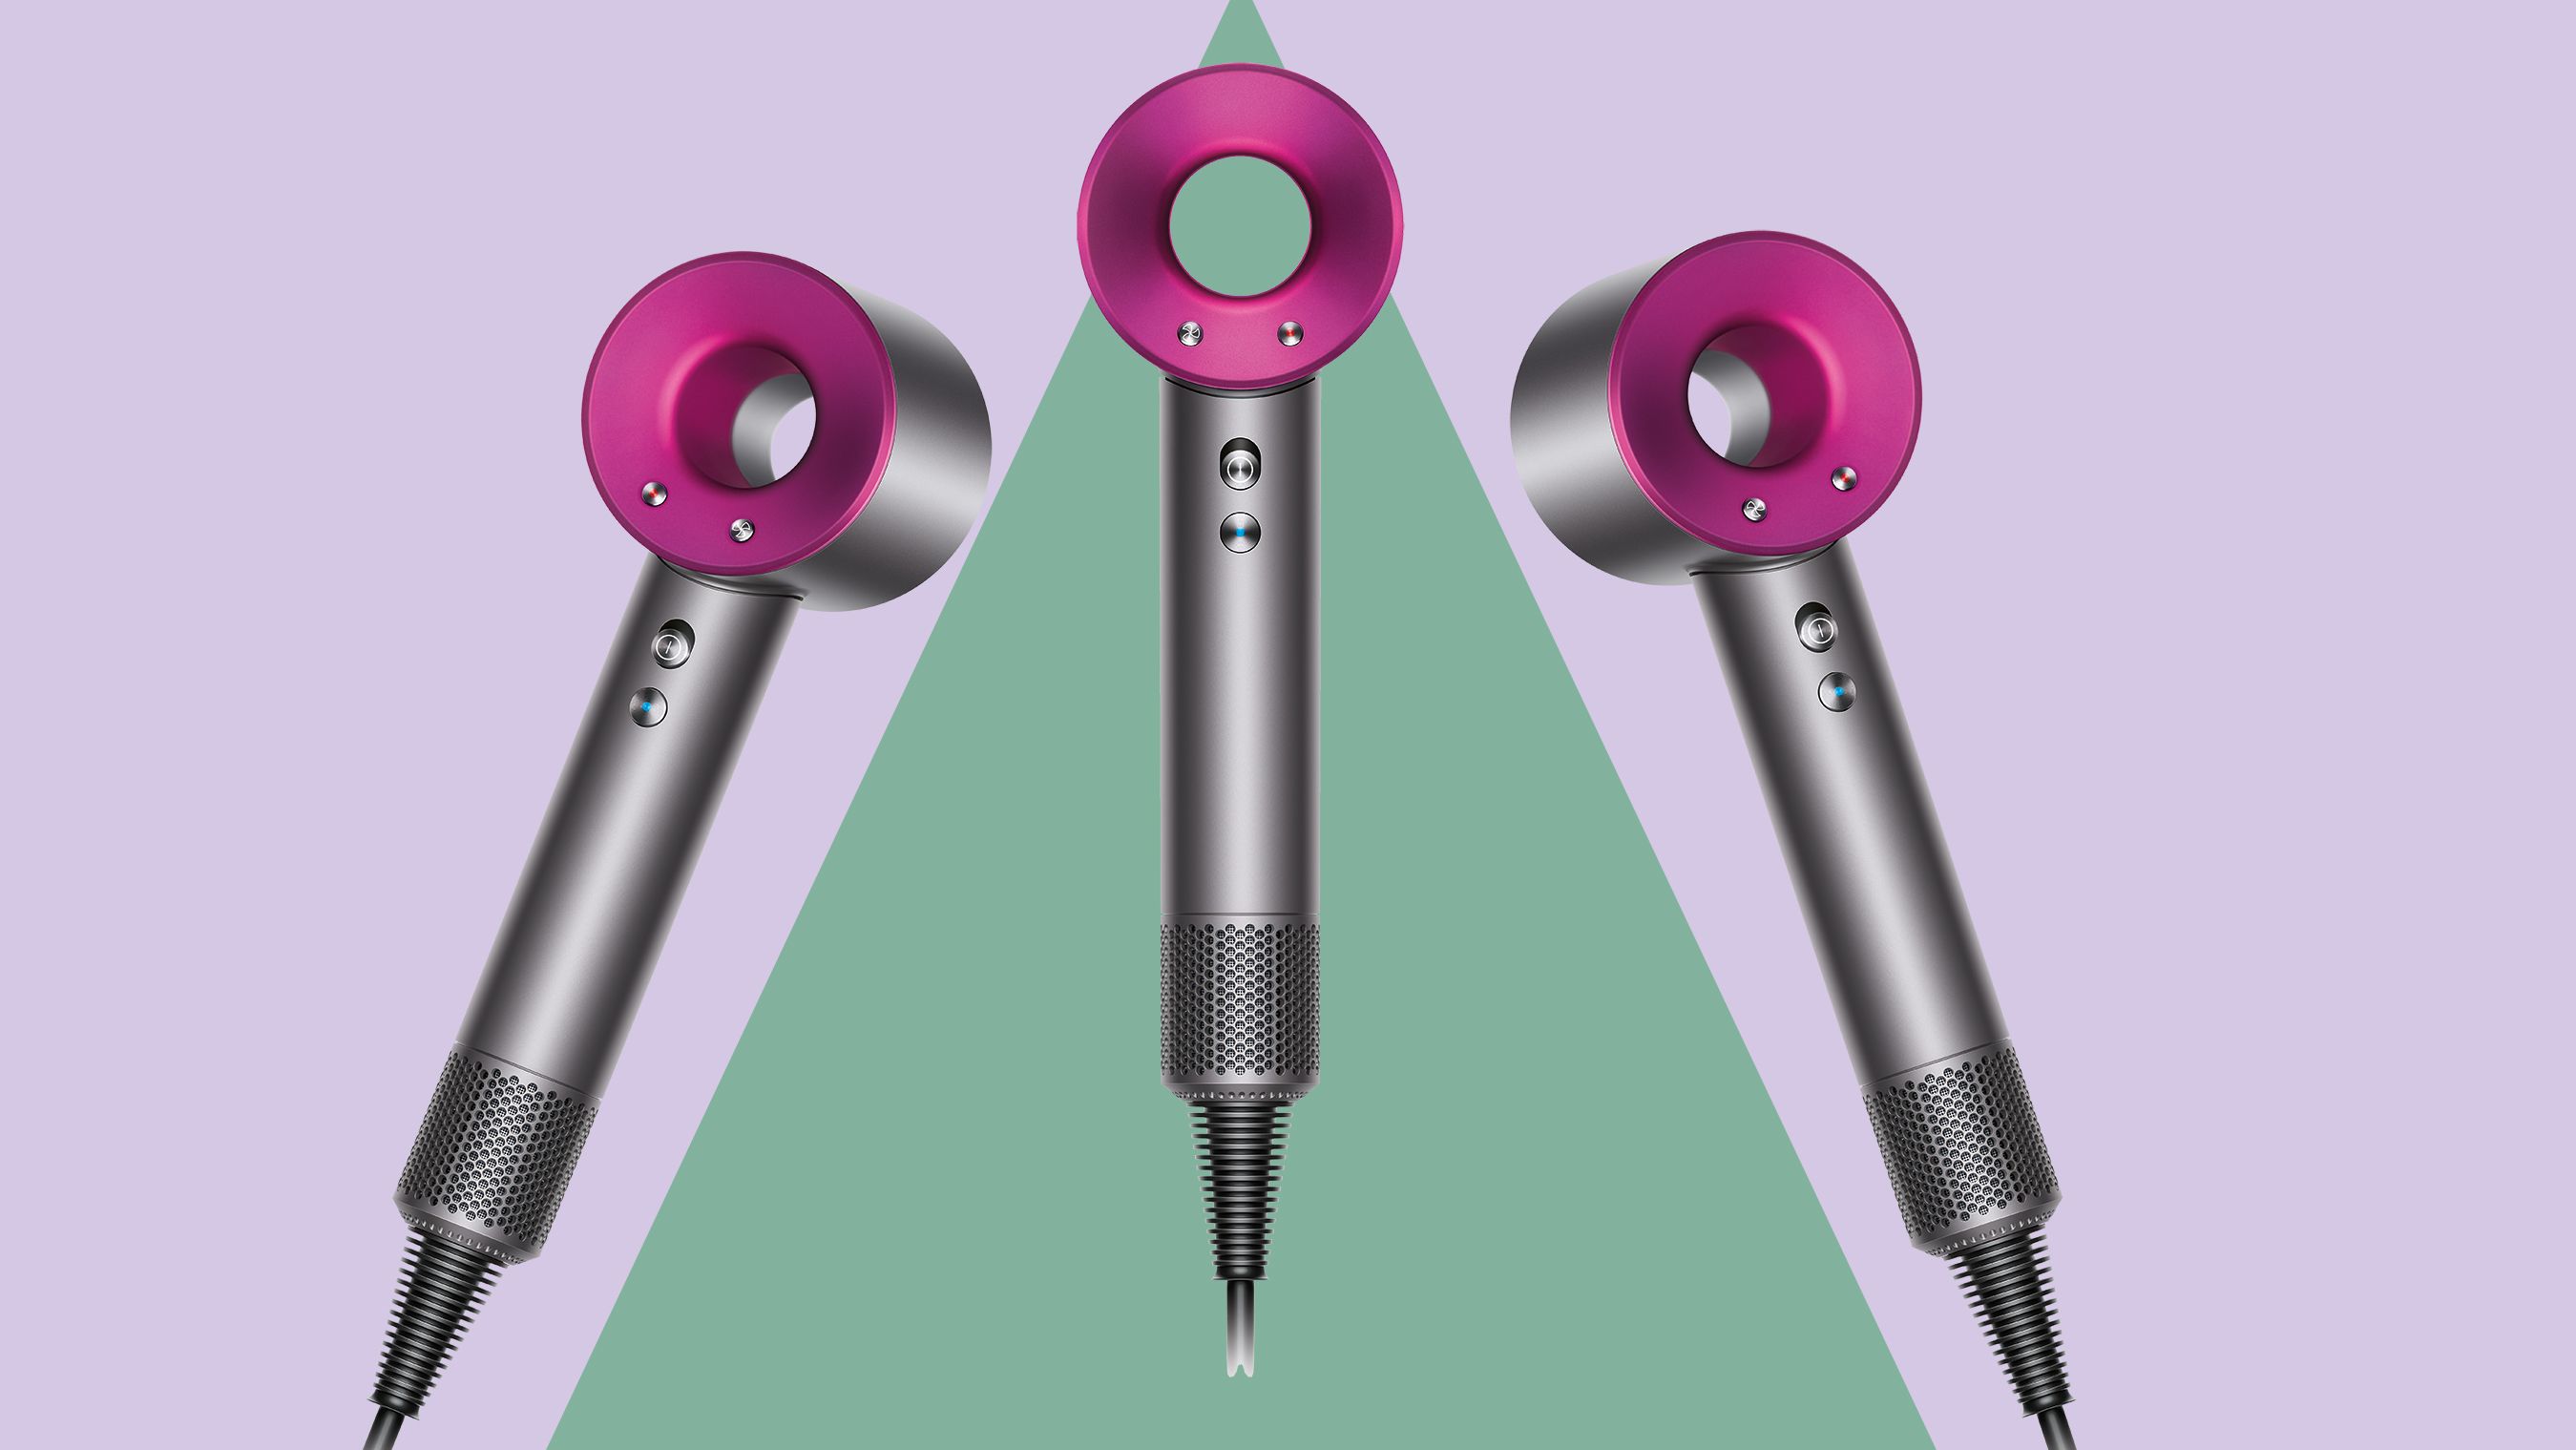 Is the Dyson Supersonic Hair Dryer Worth the Price? No!